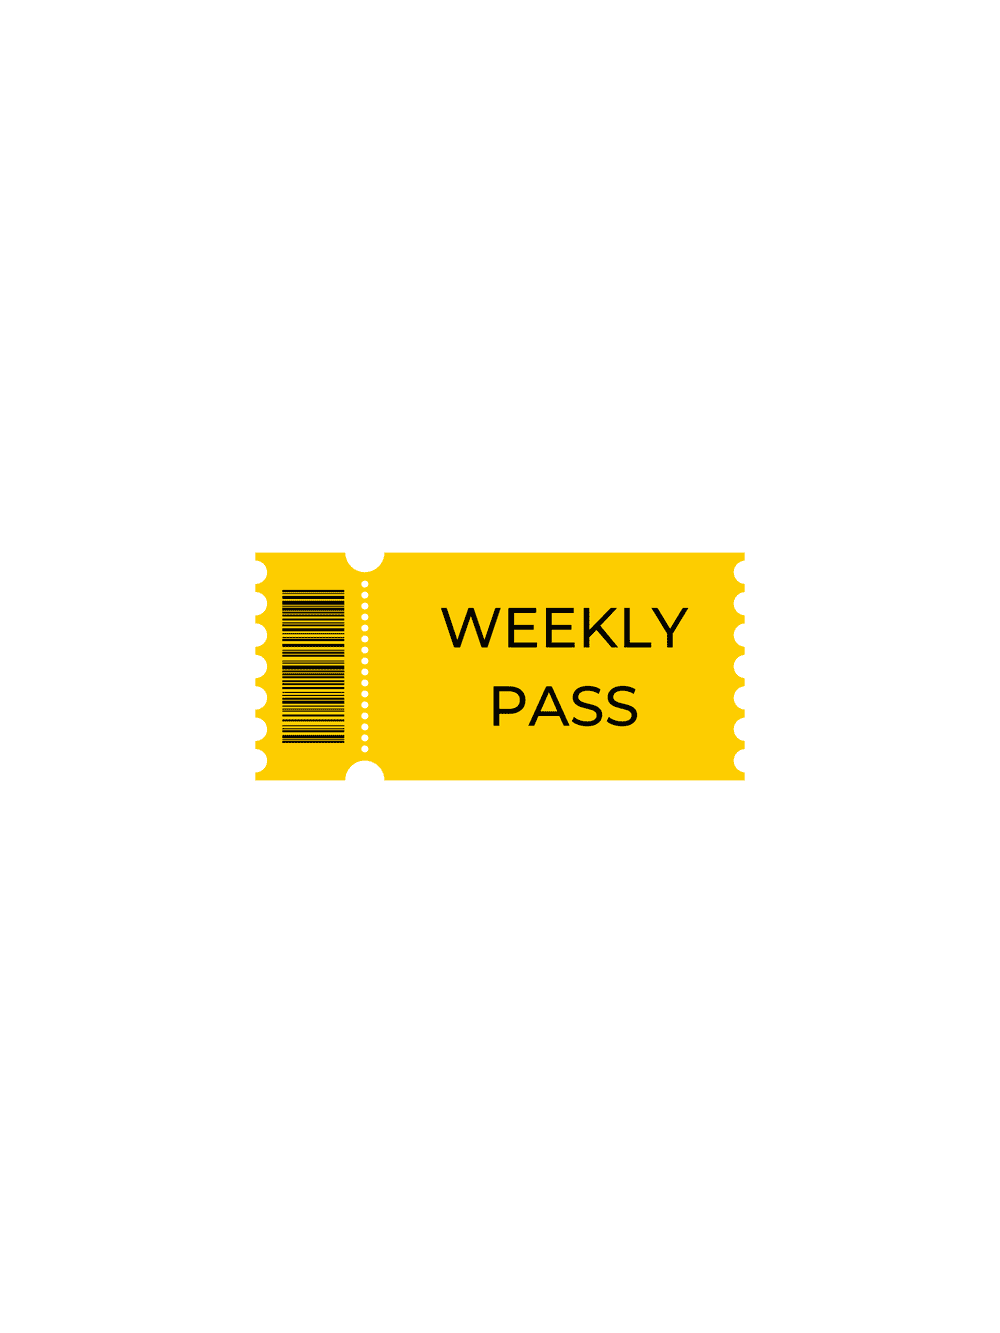 Weekly pass